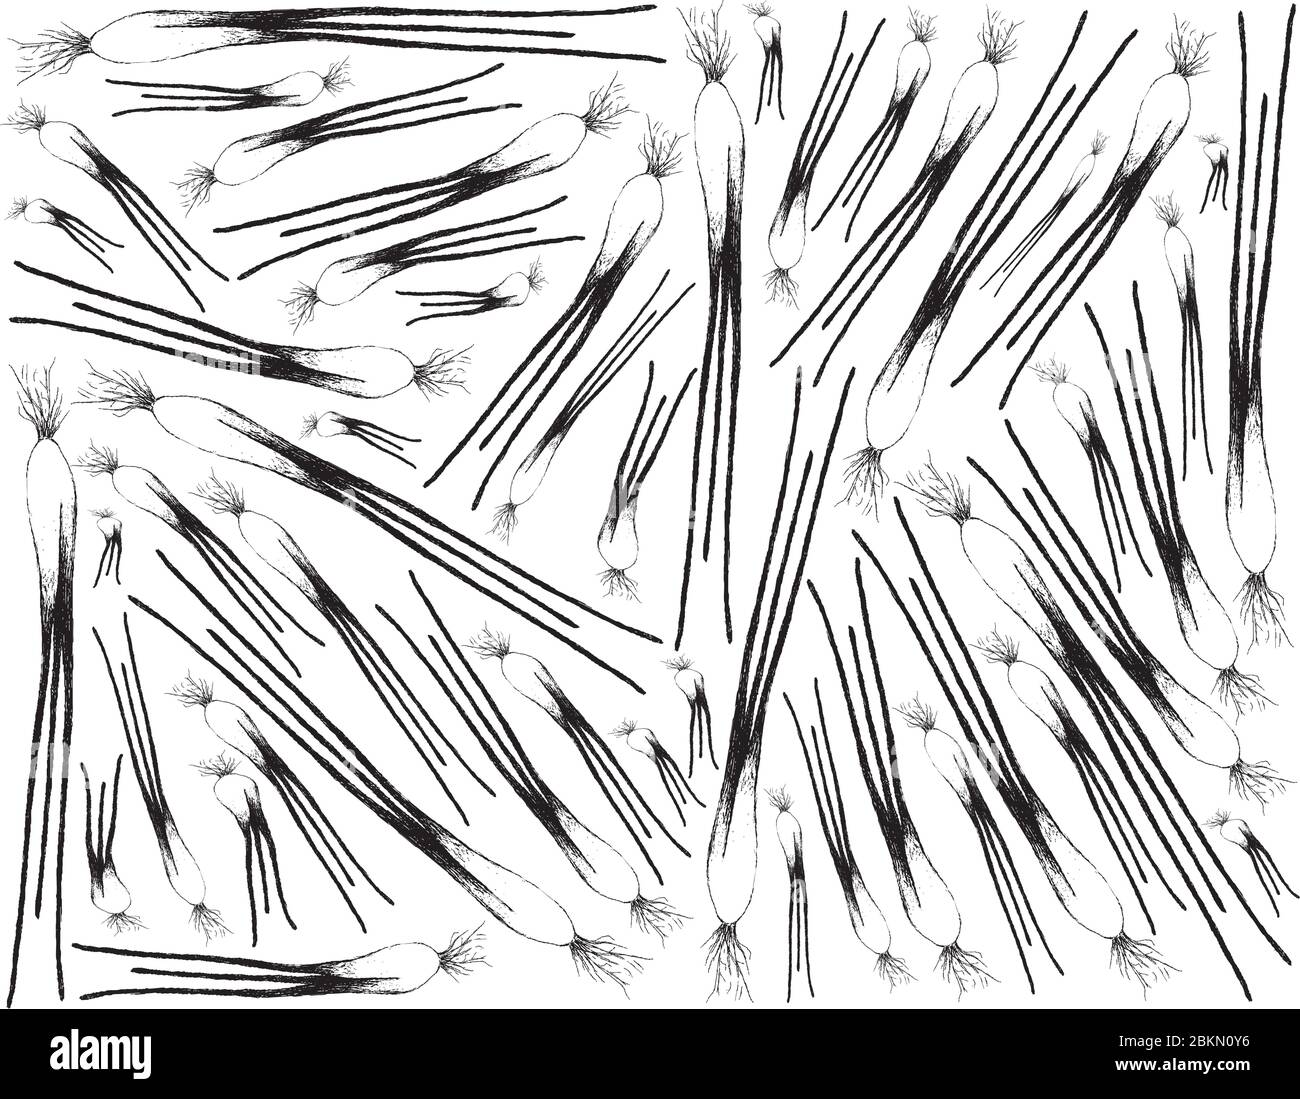 Herbal Plants, Illustration Hand Drawn Sketch Background of Fresh Shallots, Spanish Onions, or Red Onions Used for Seasoning in Cooking. Stock Vector